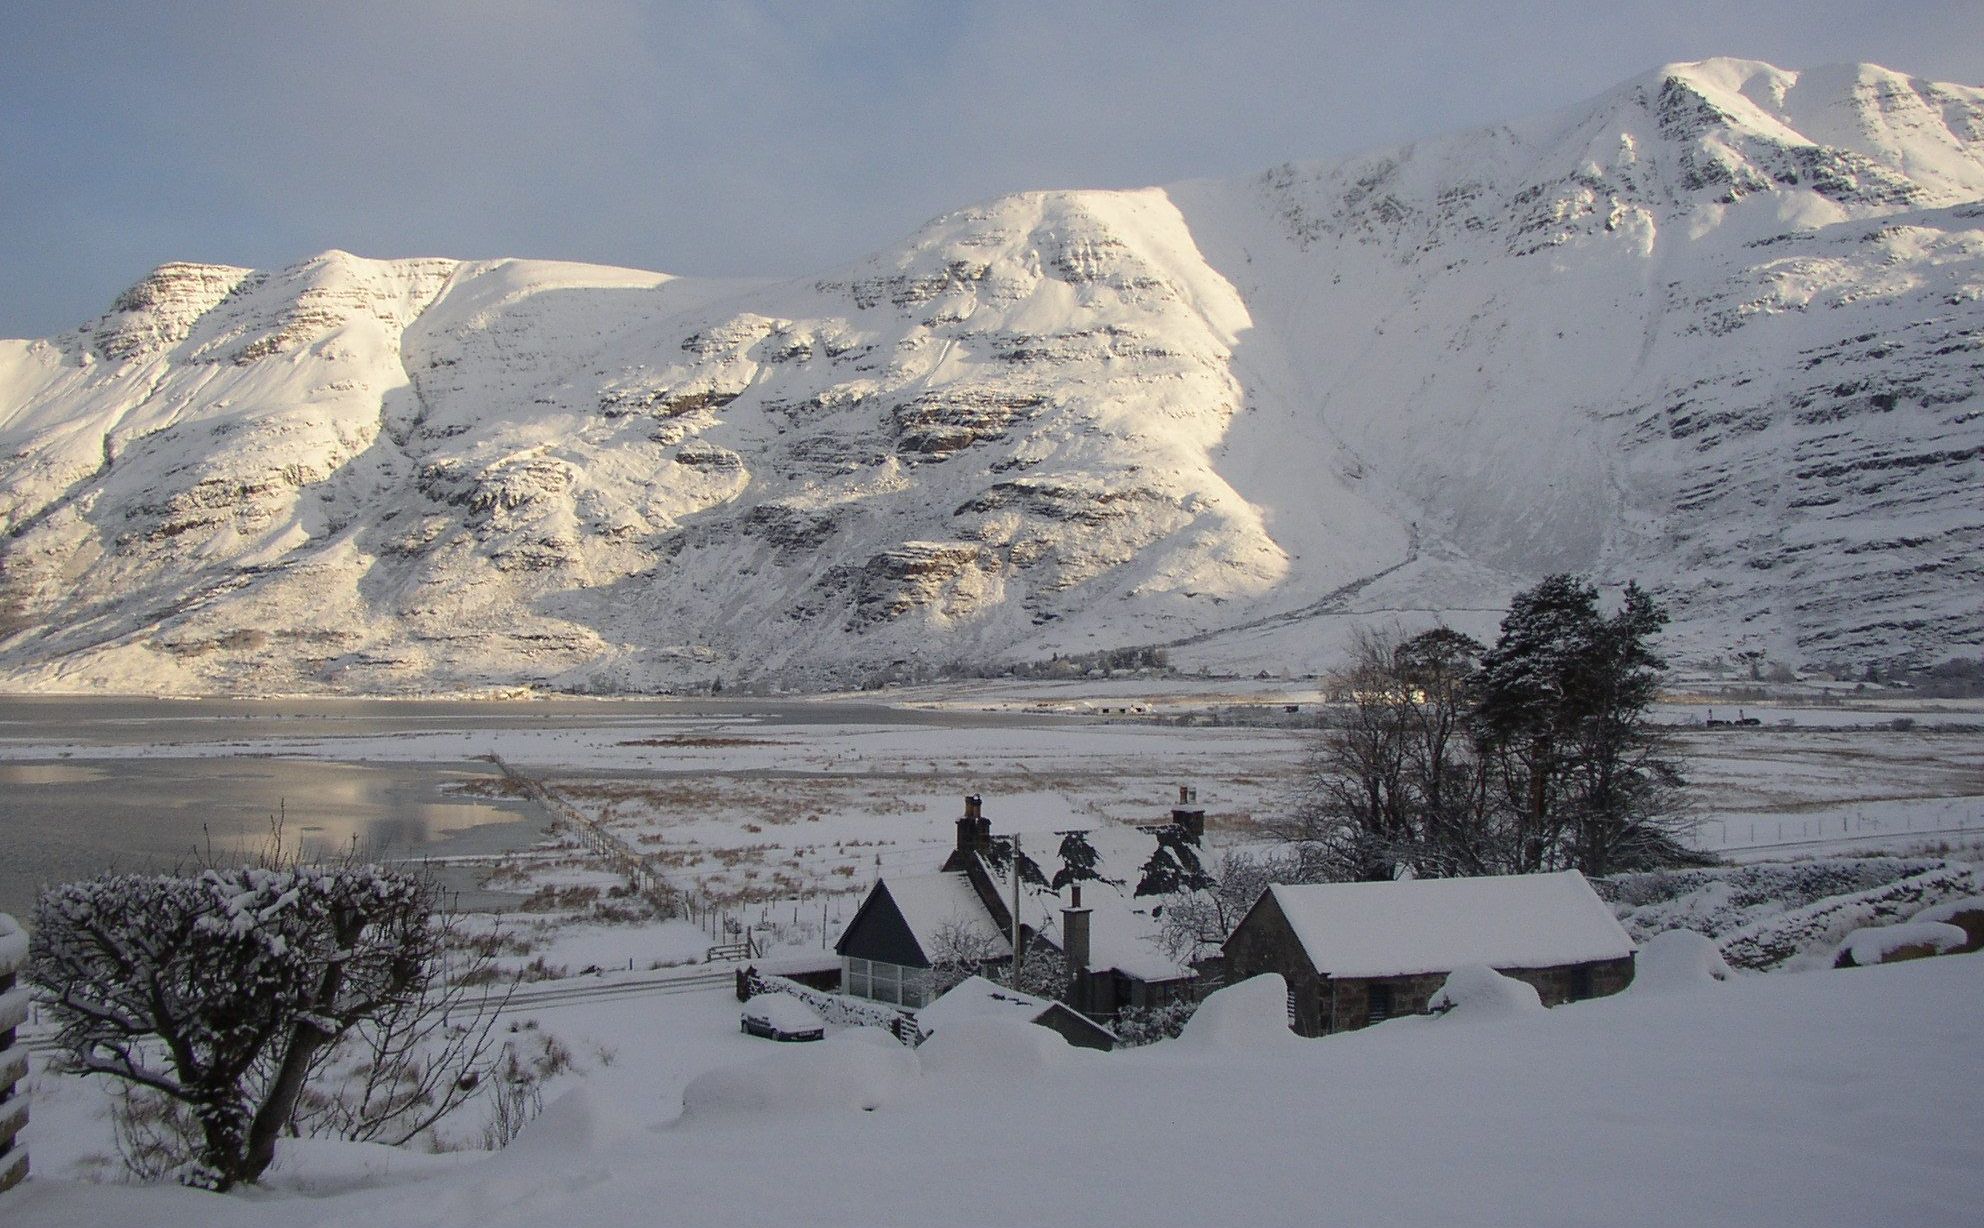 Winter on Liathach in the Torridon Region of the NW Highlands of Scotland